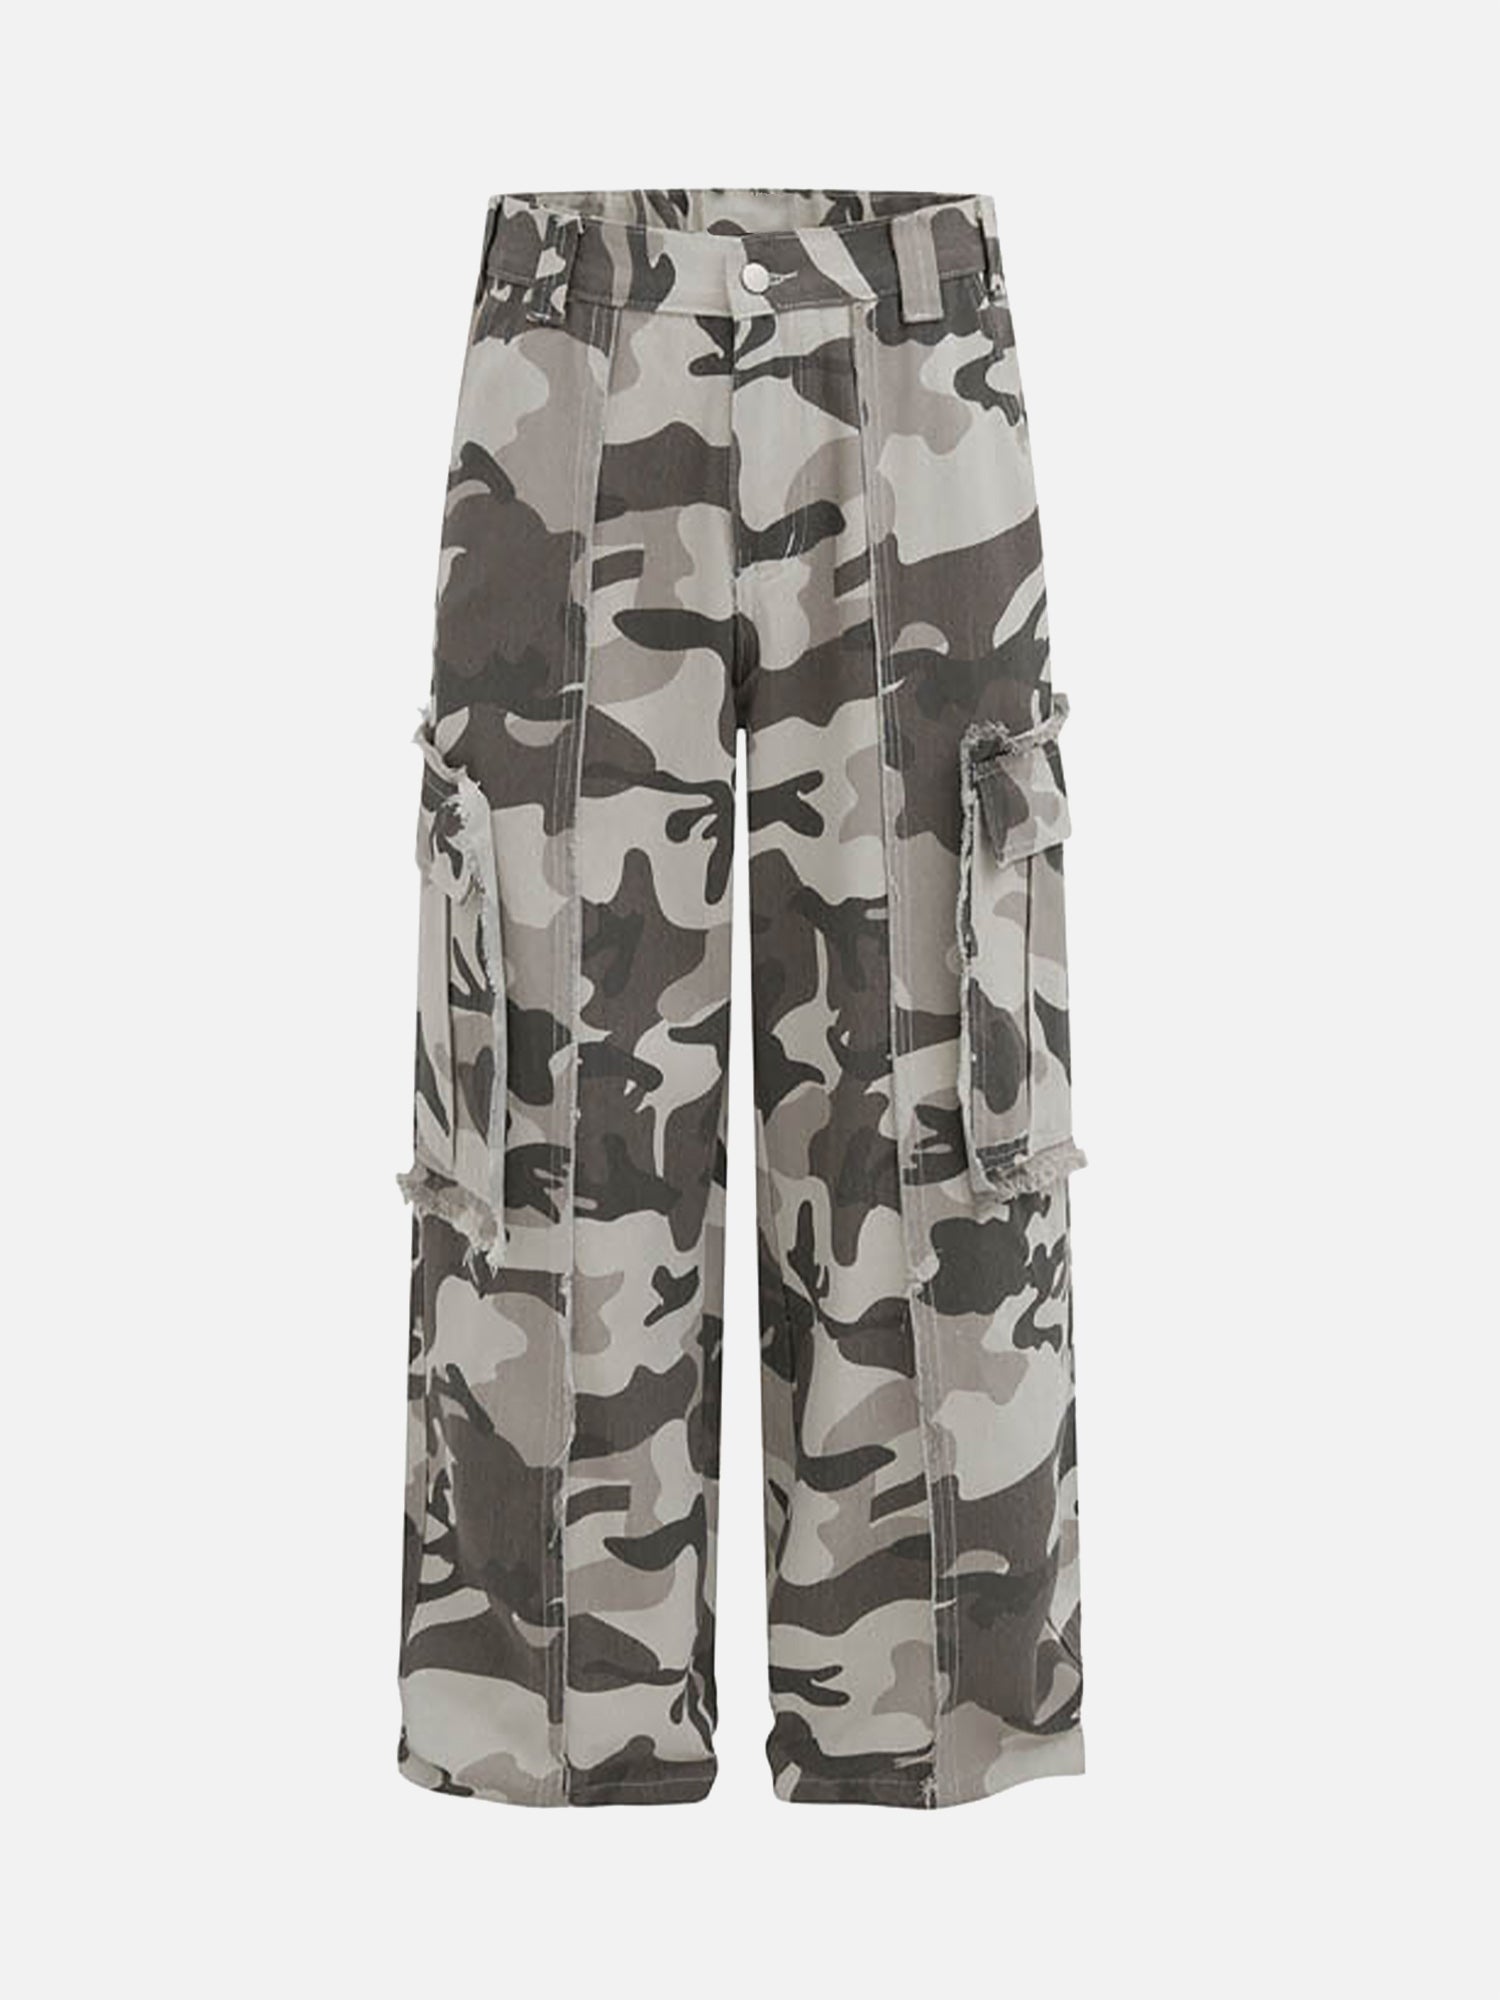 Cleanfit Street Camouflage Multi-pocket Raw Edge Niche Overalls cargo Pants